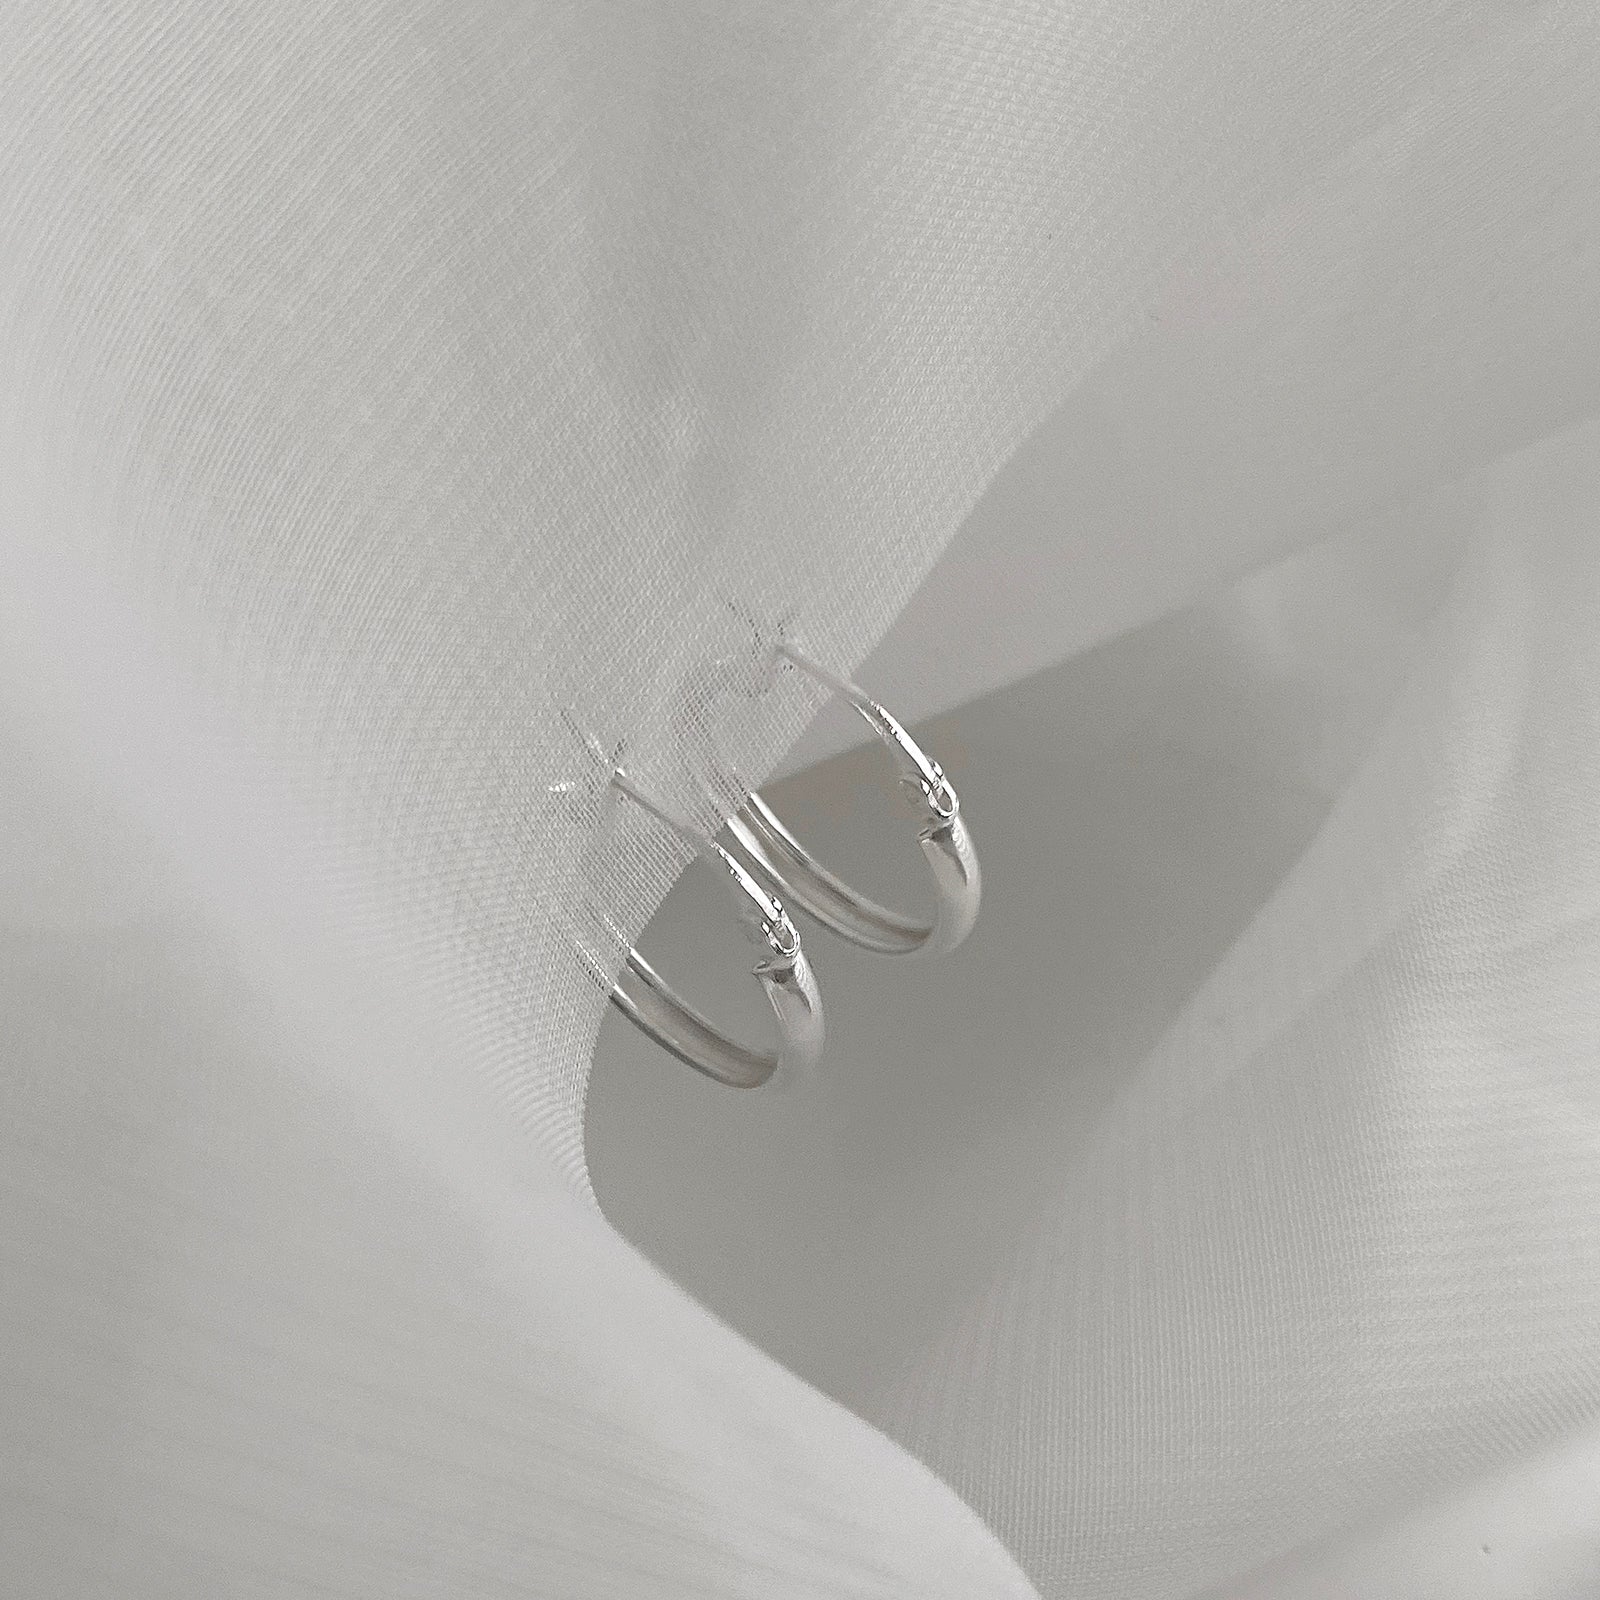 Jane Hoops 20mm are classic hoop earrings with a latch back for closure. It's made of 925 sterling silver with a shiny smooth finish. Perfect hoop earrings for everyday.